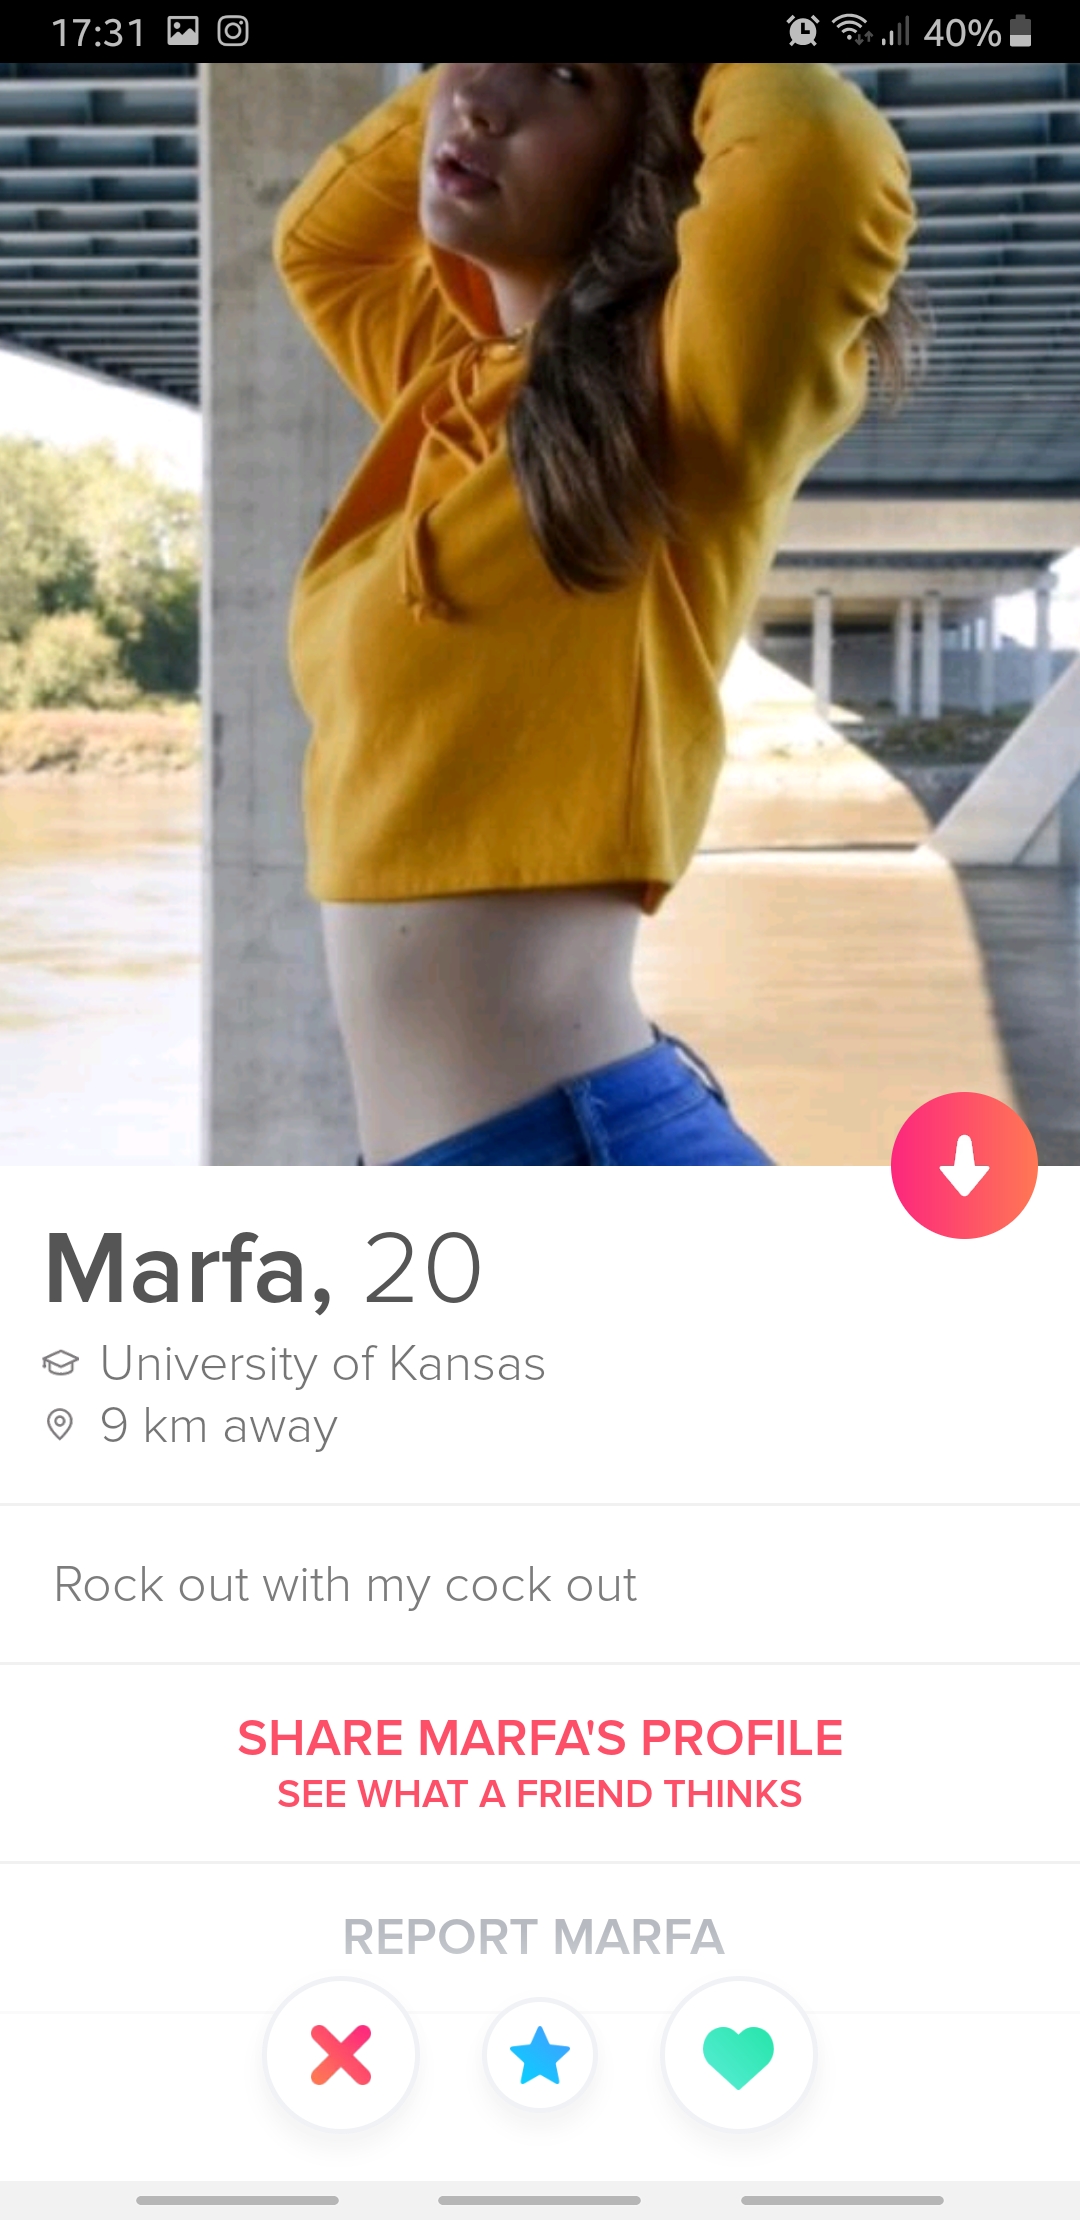 tinder - shoulder - @ 40% Marfa, 20 University of Kansas ~ 9 km away Rock out with my cock out Marfa'S Profile See What A Friend Thinks Report Marfa